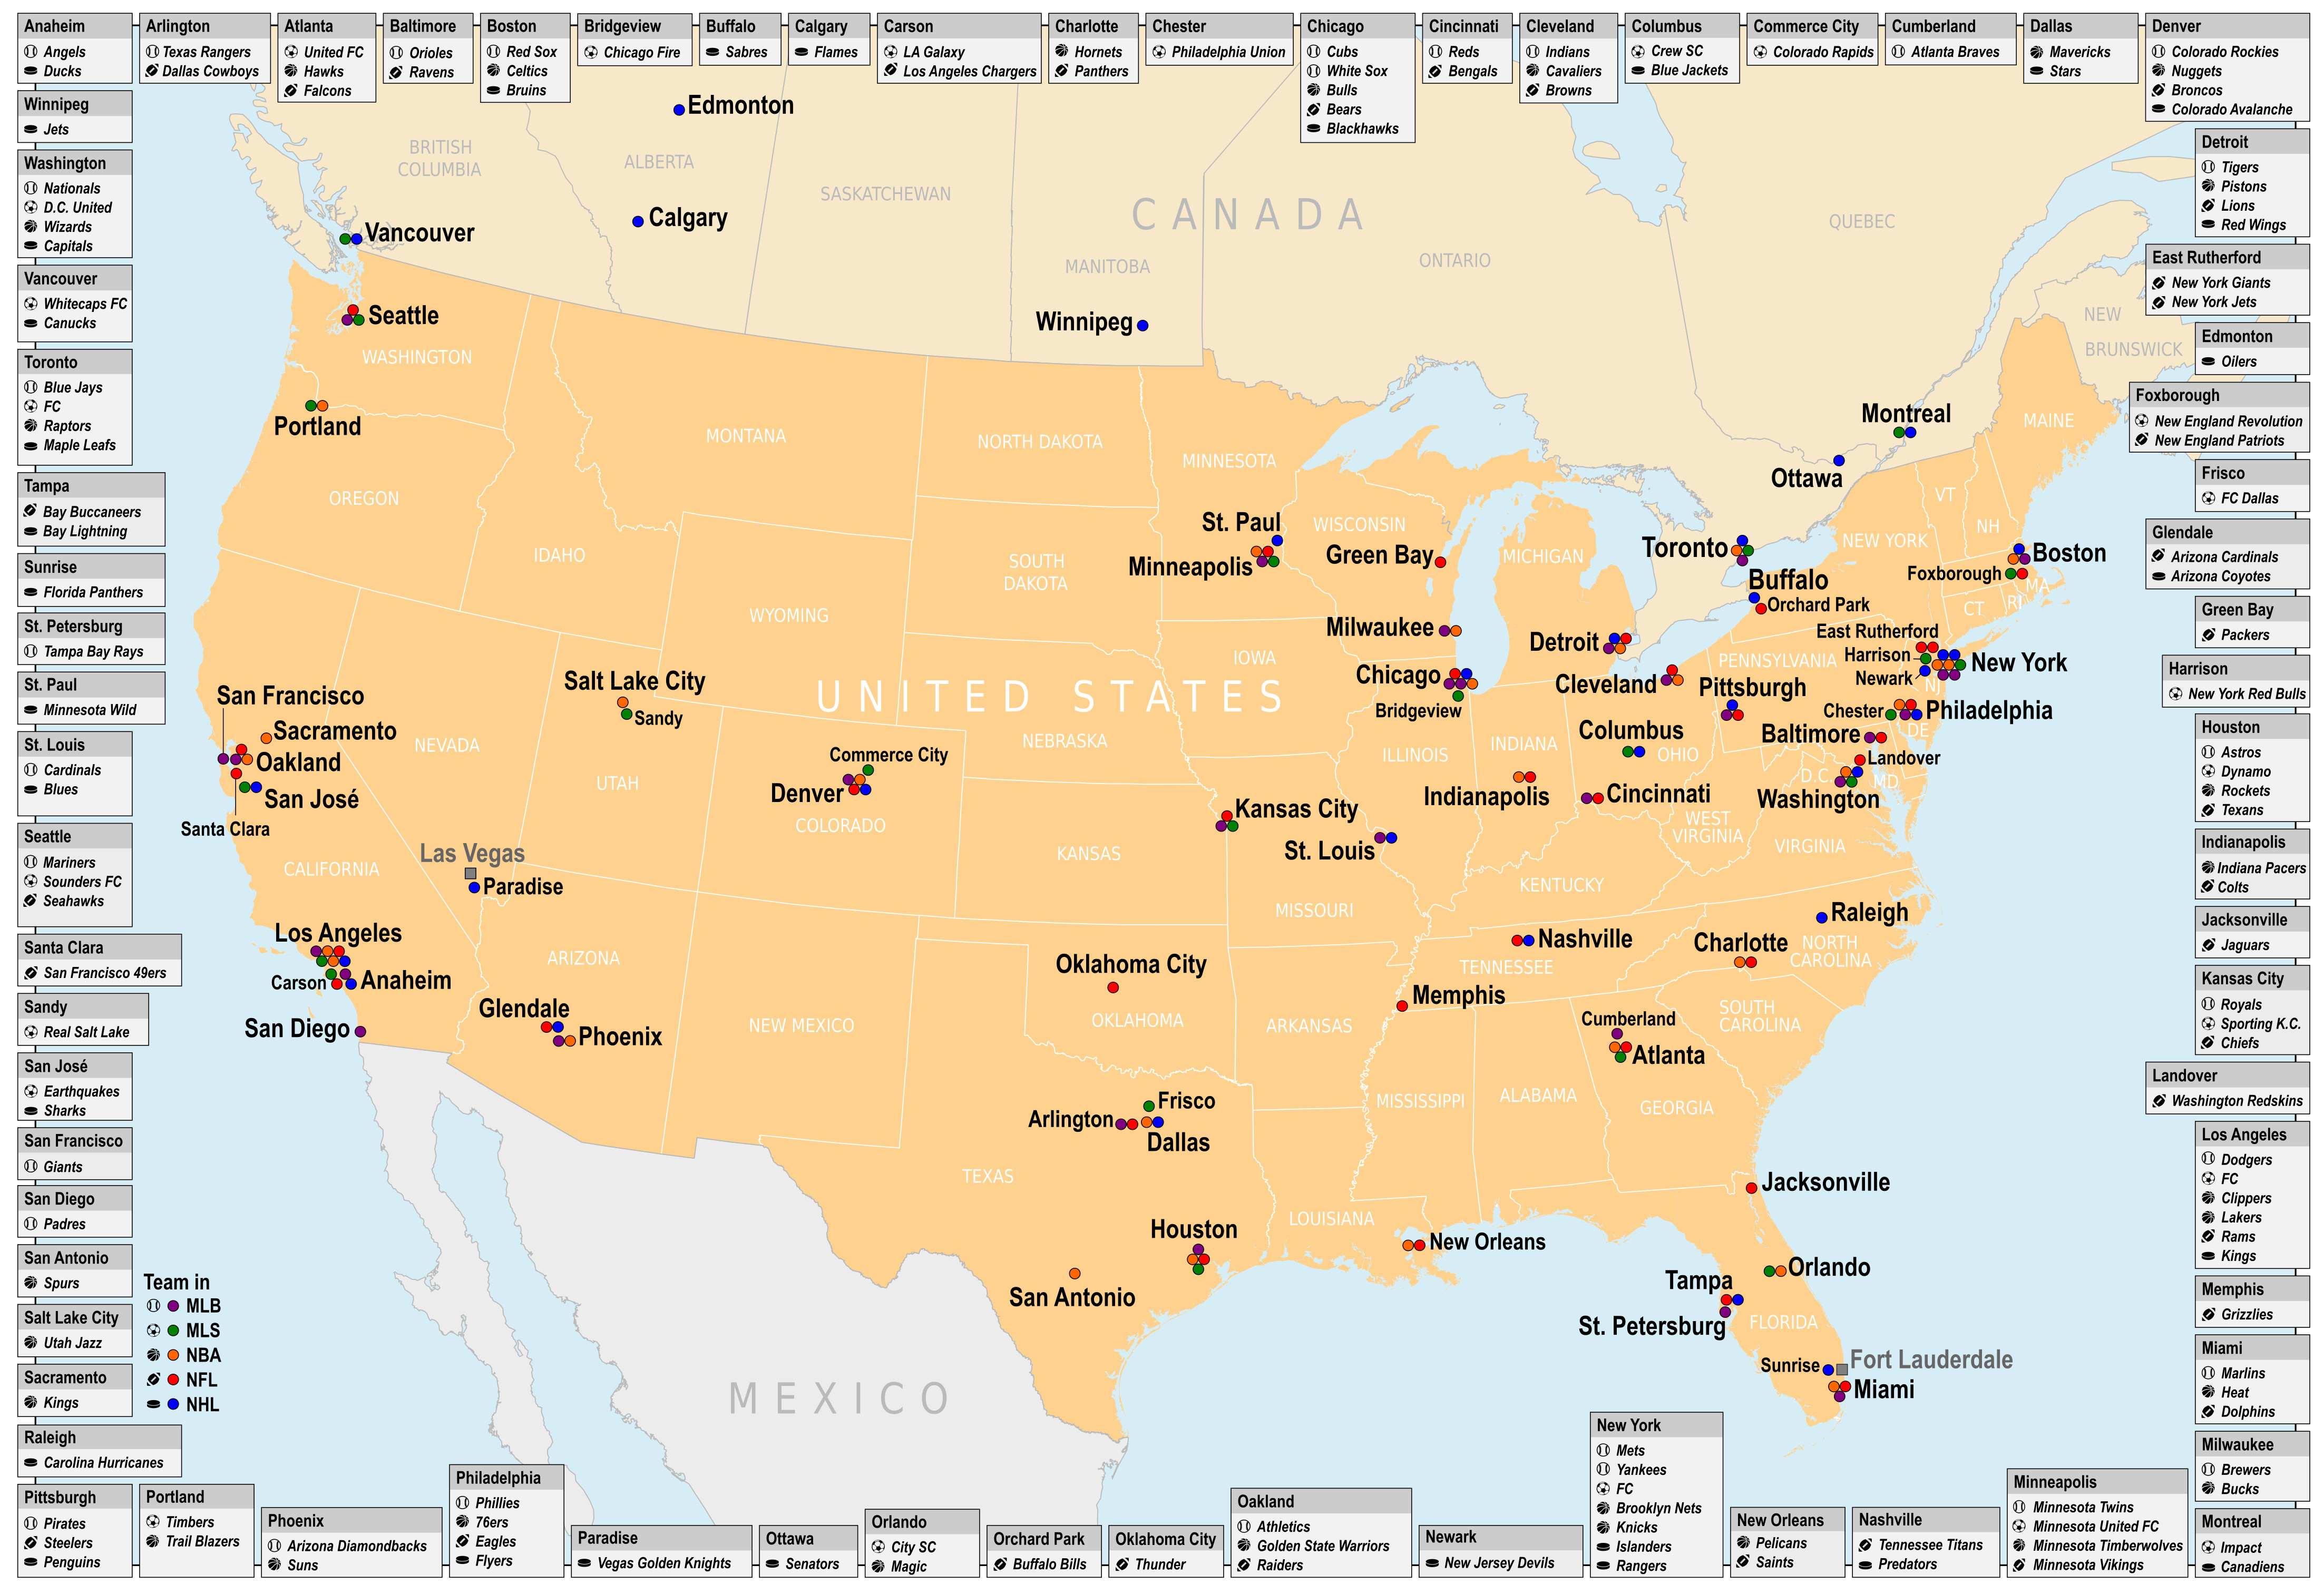 Mls Tabelle
 File Map of Cities in the USA and Canada with MLB MLS